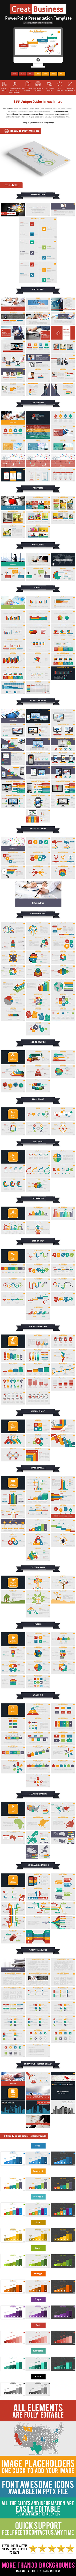 Great Business PowerPoint Presentation Template